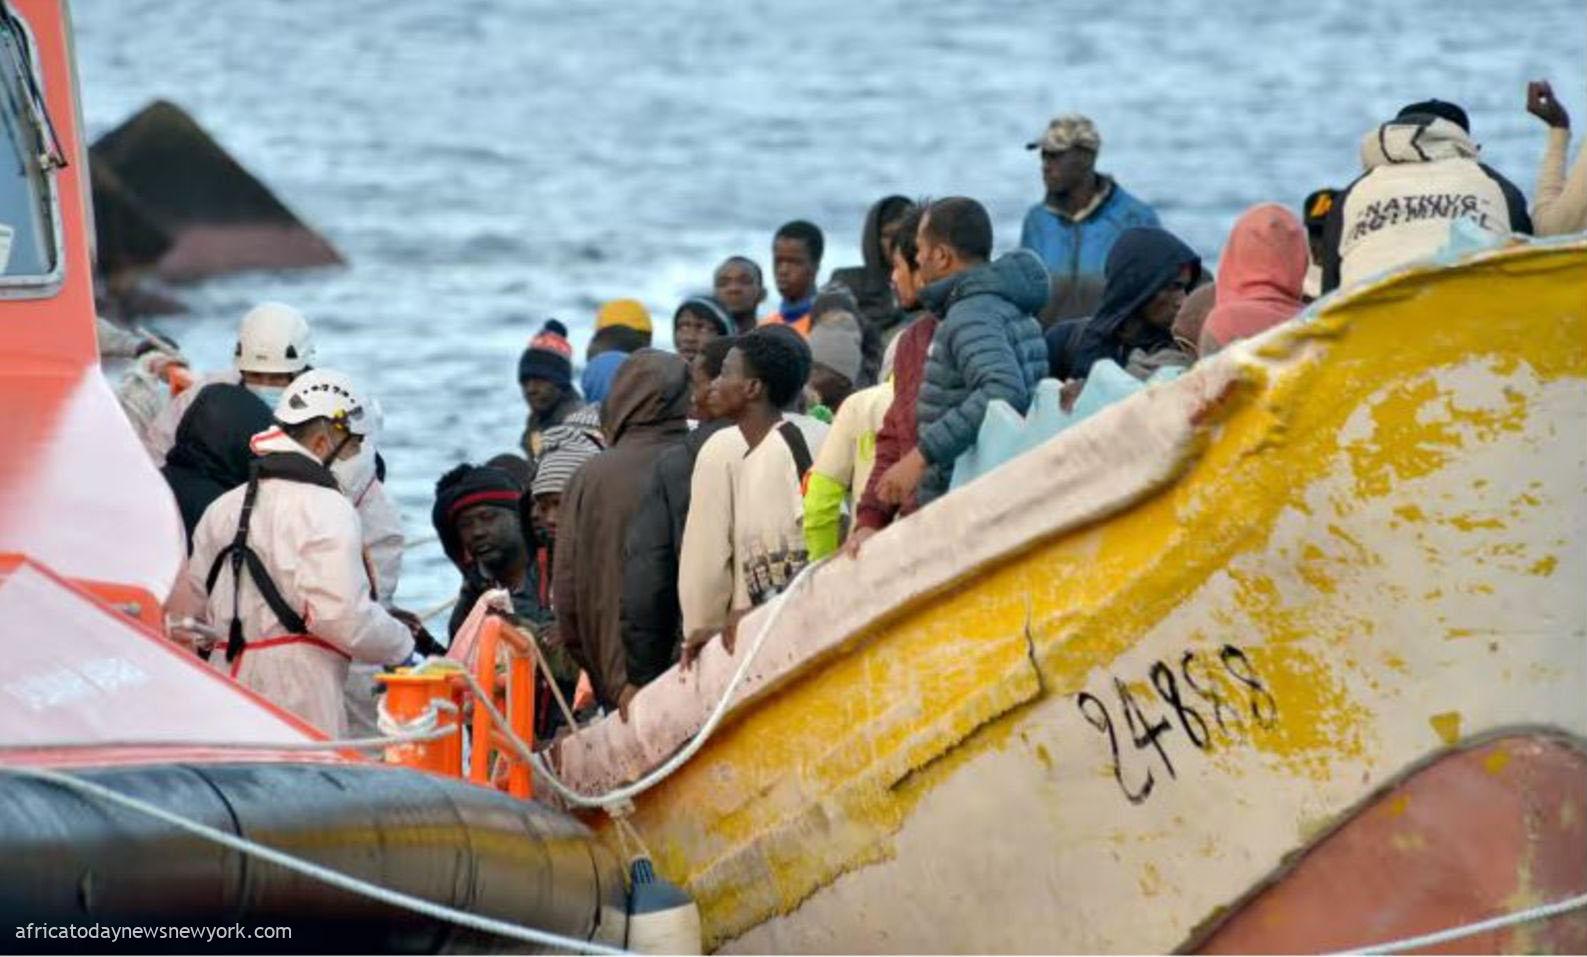 Over 60 Migrants Feared Drowned Off Libya, IOM Confirms